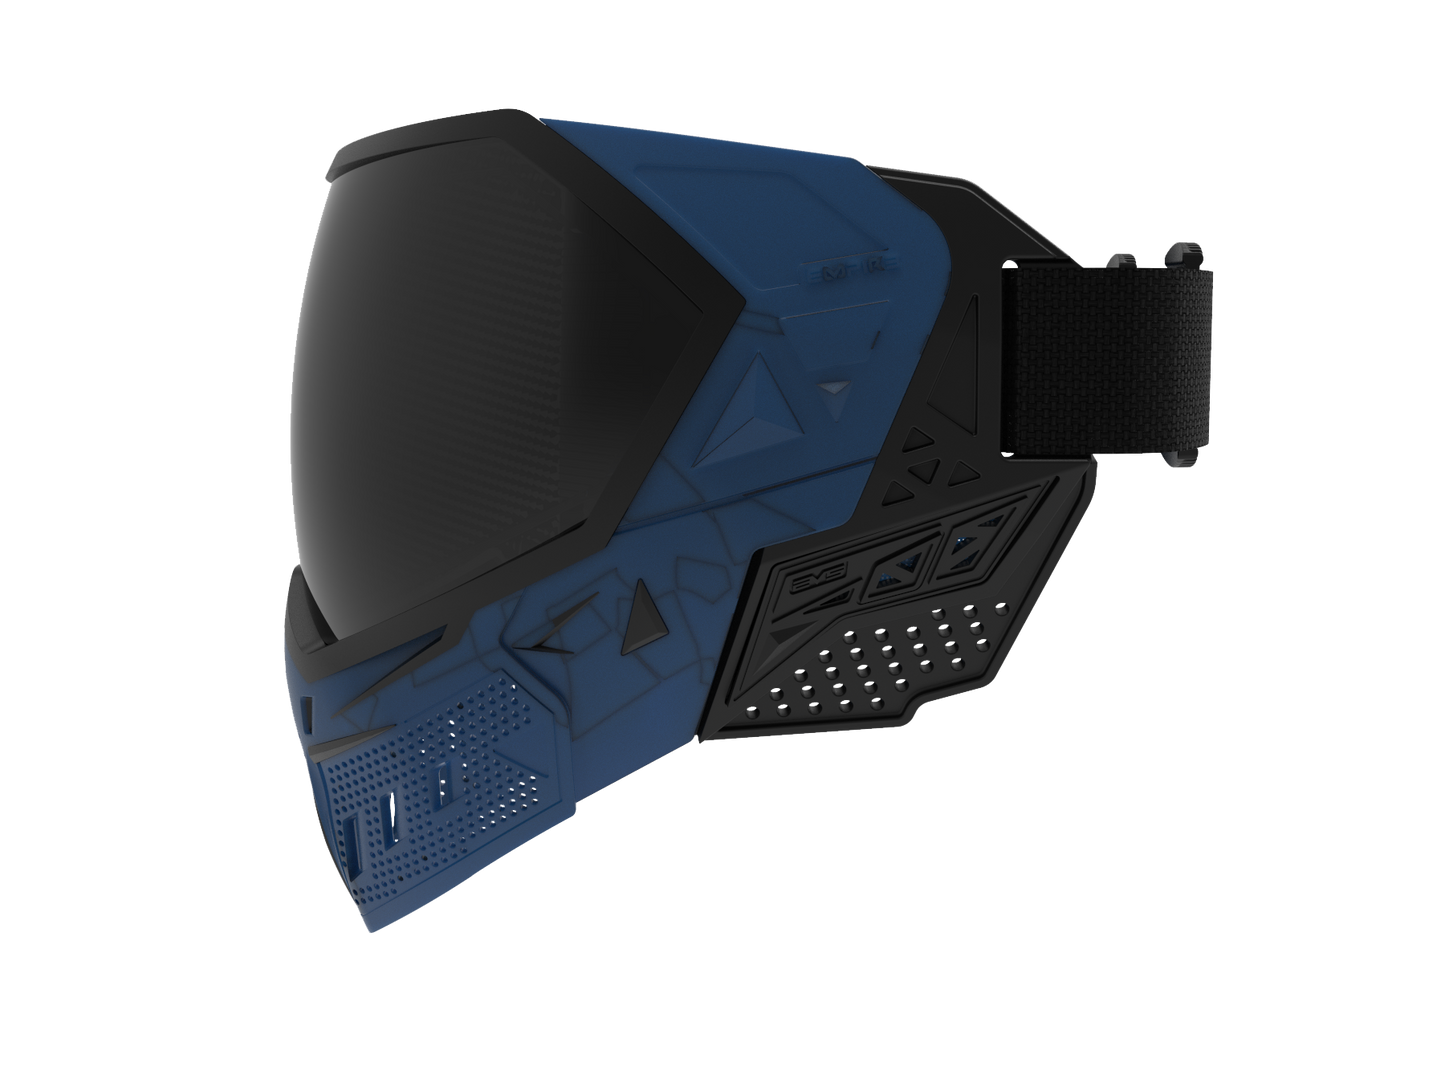 Empire EVS Paintball/Airsoft Goggle